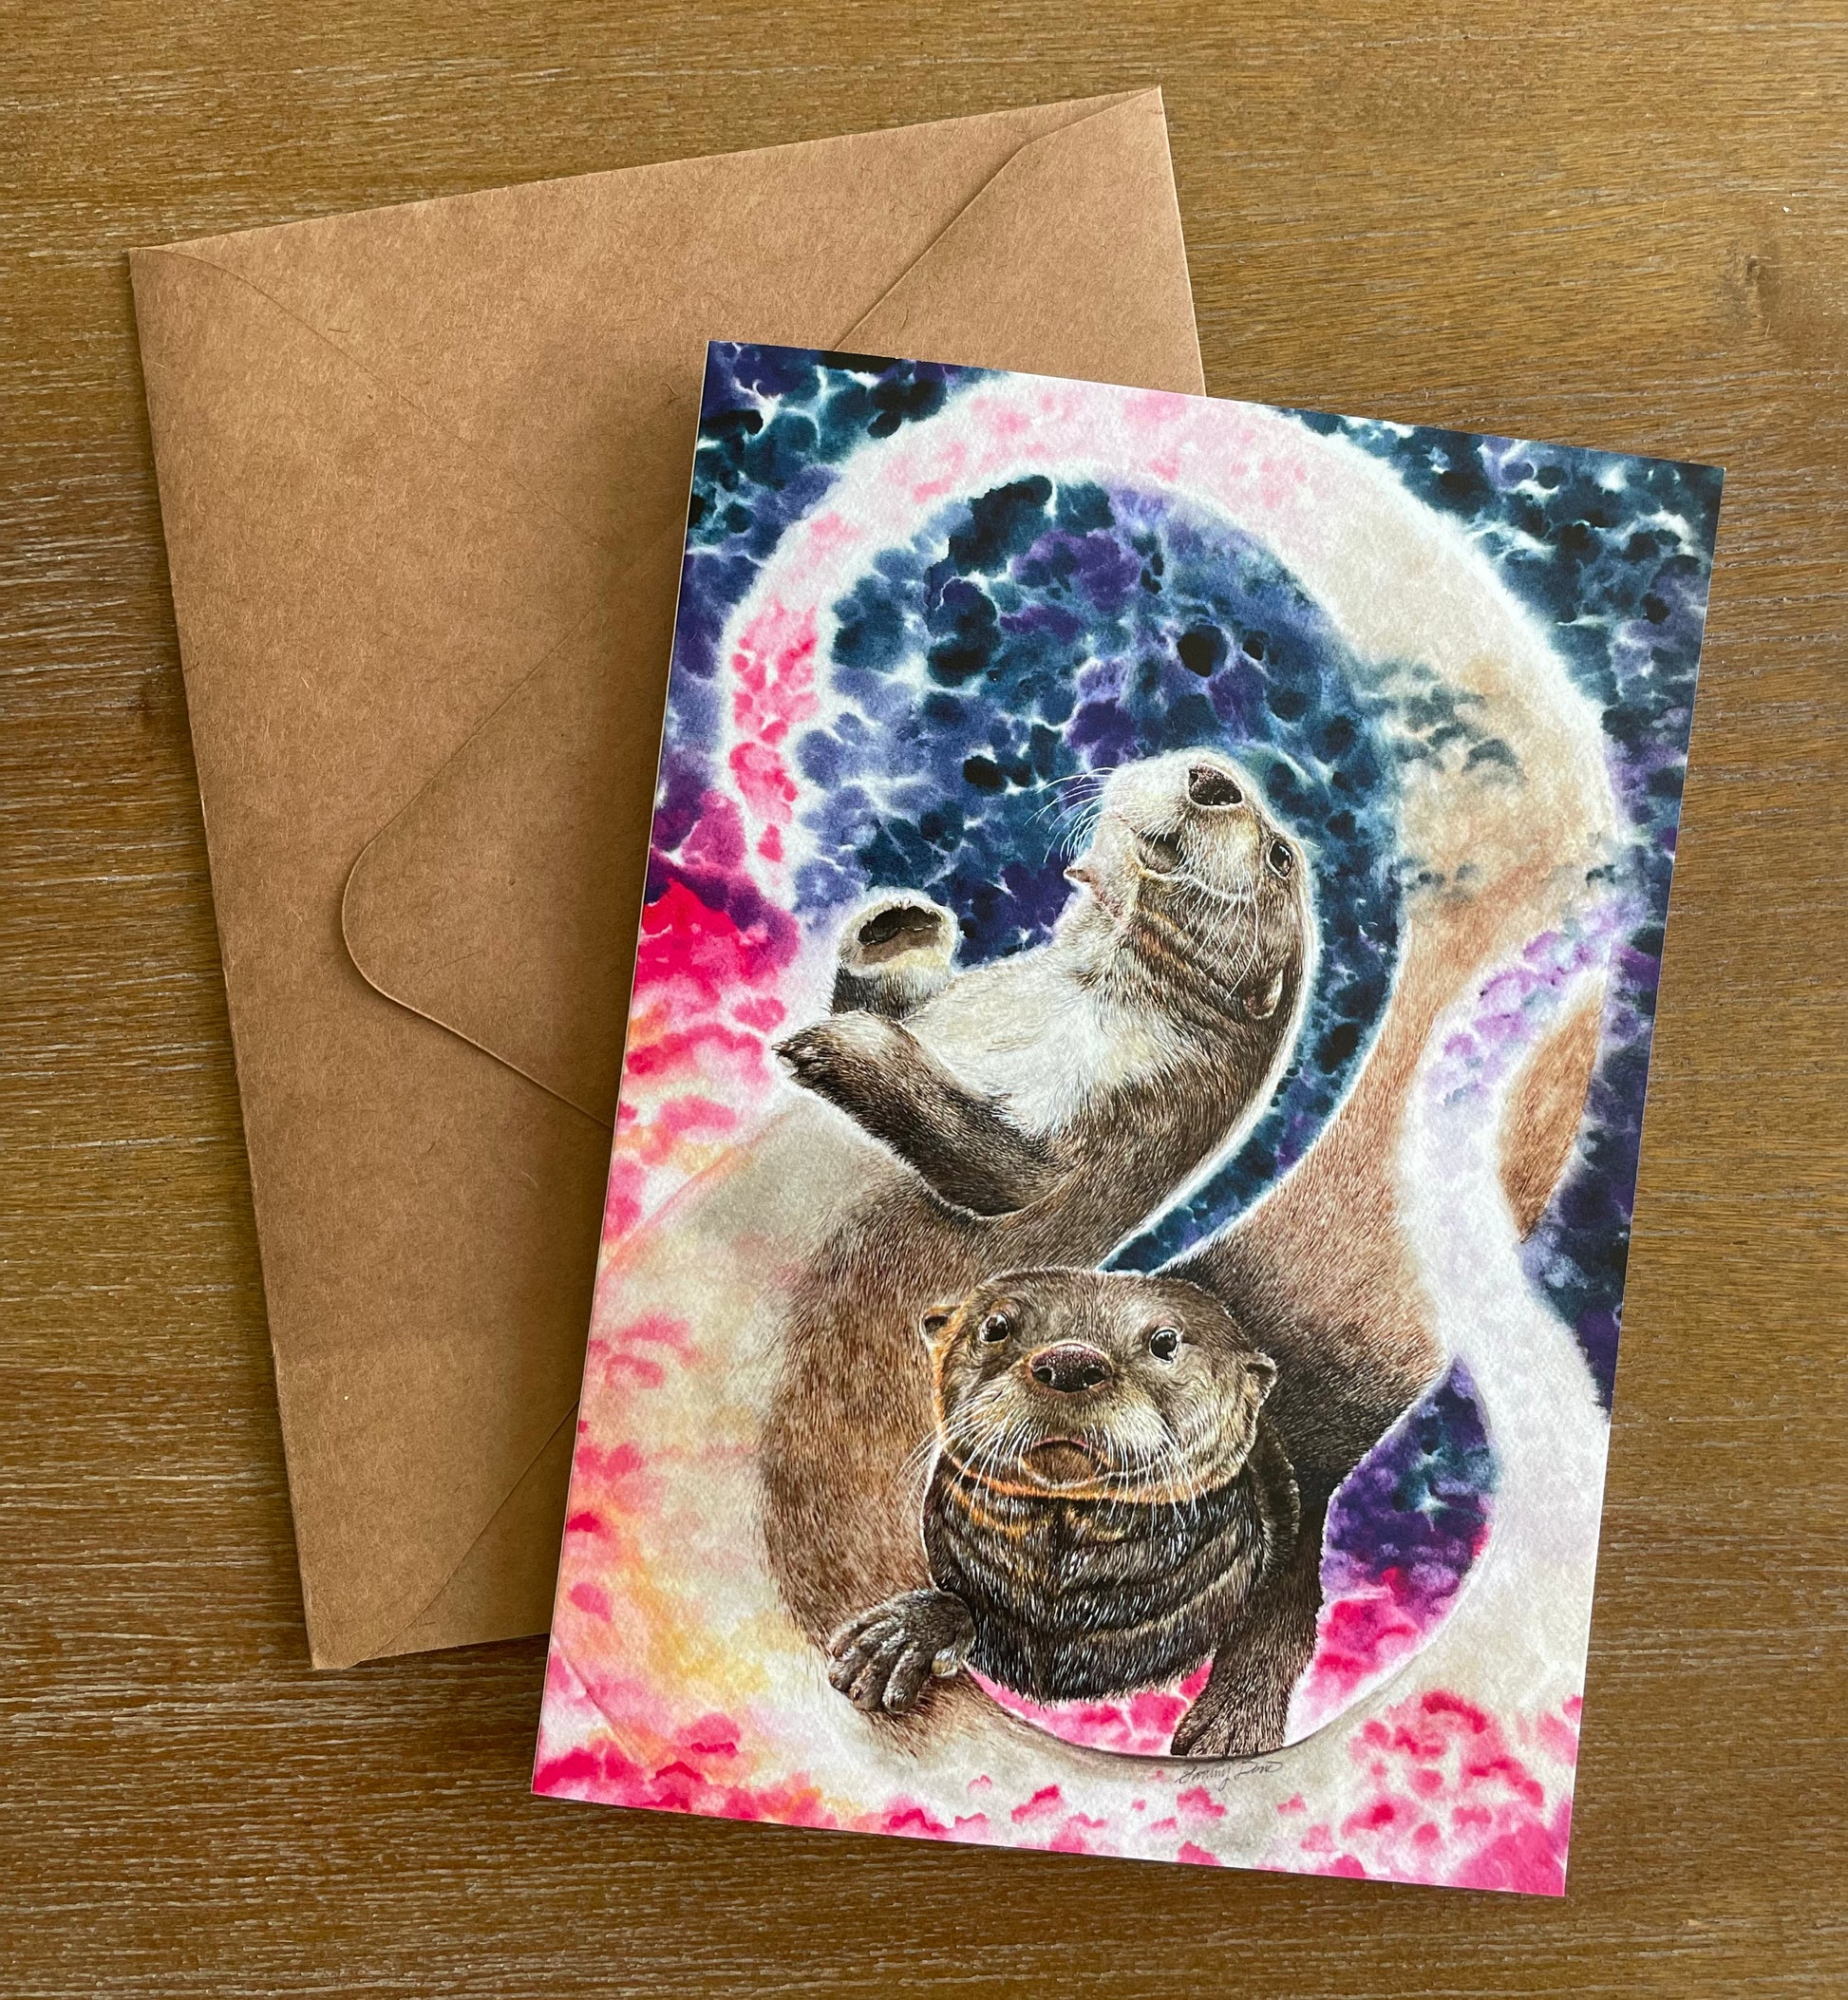 A 5x7" eco-friendly greeting card with original watercolor artwork from the Wild Planet Creations collection depicting two North American river otters.